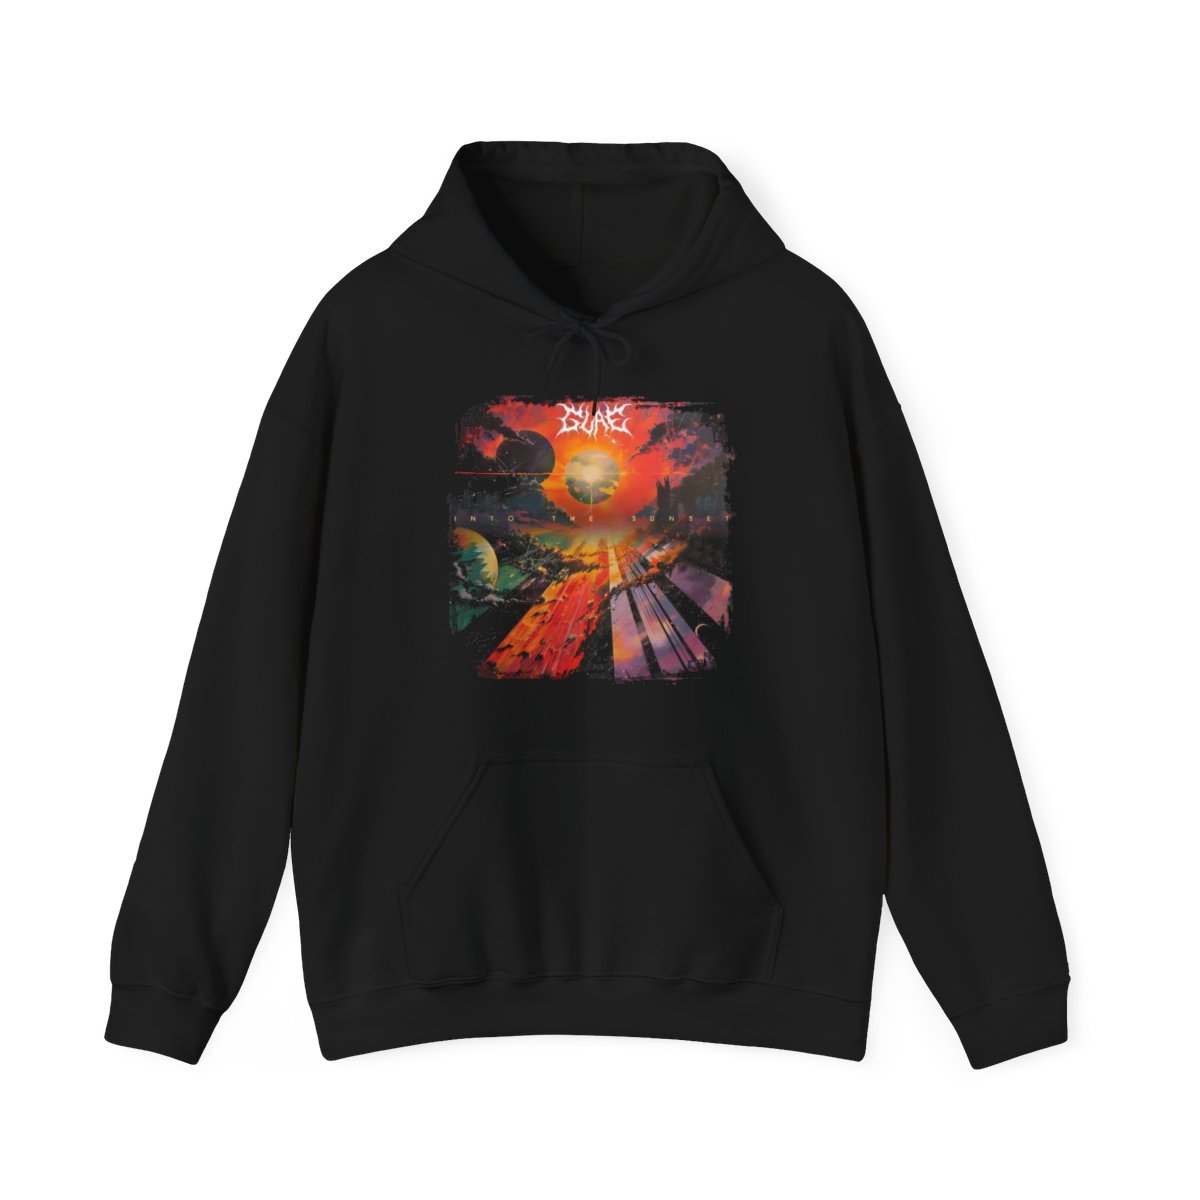 Glae – Into The Sunset Pullover Hooded Sweatshirt